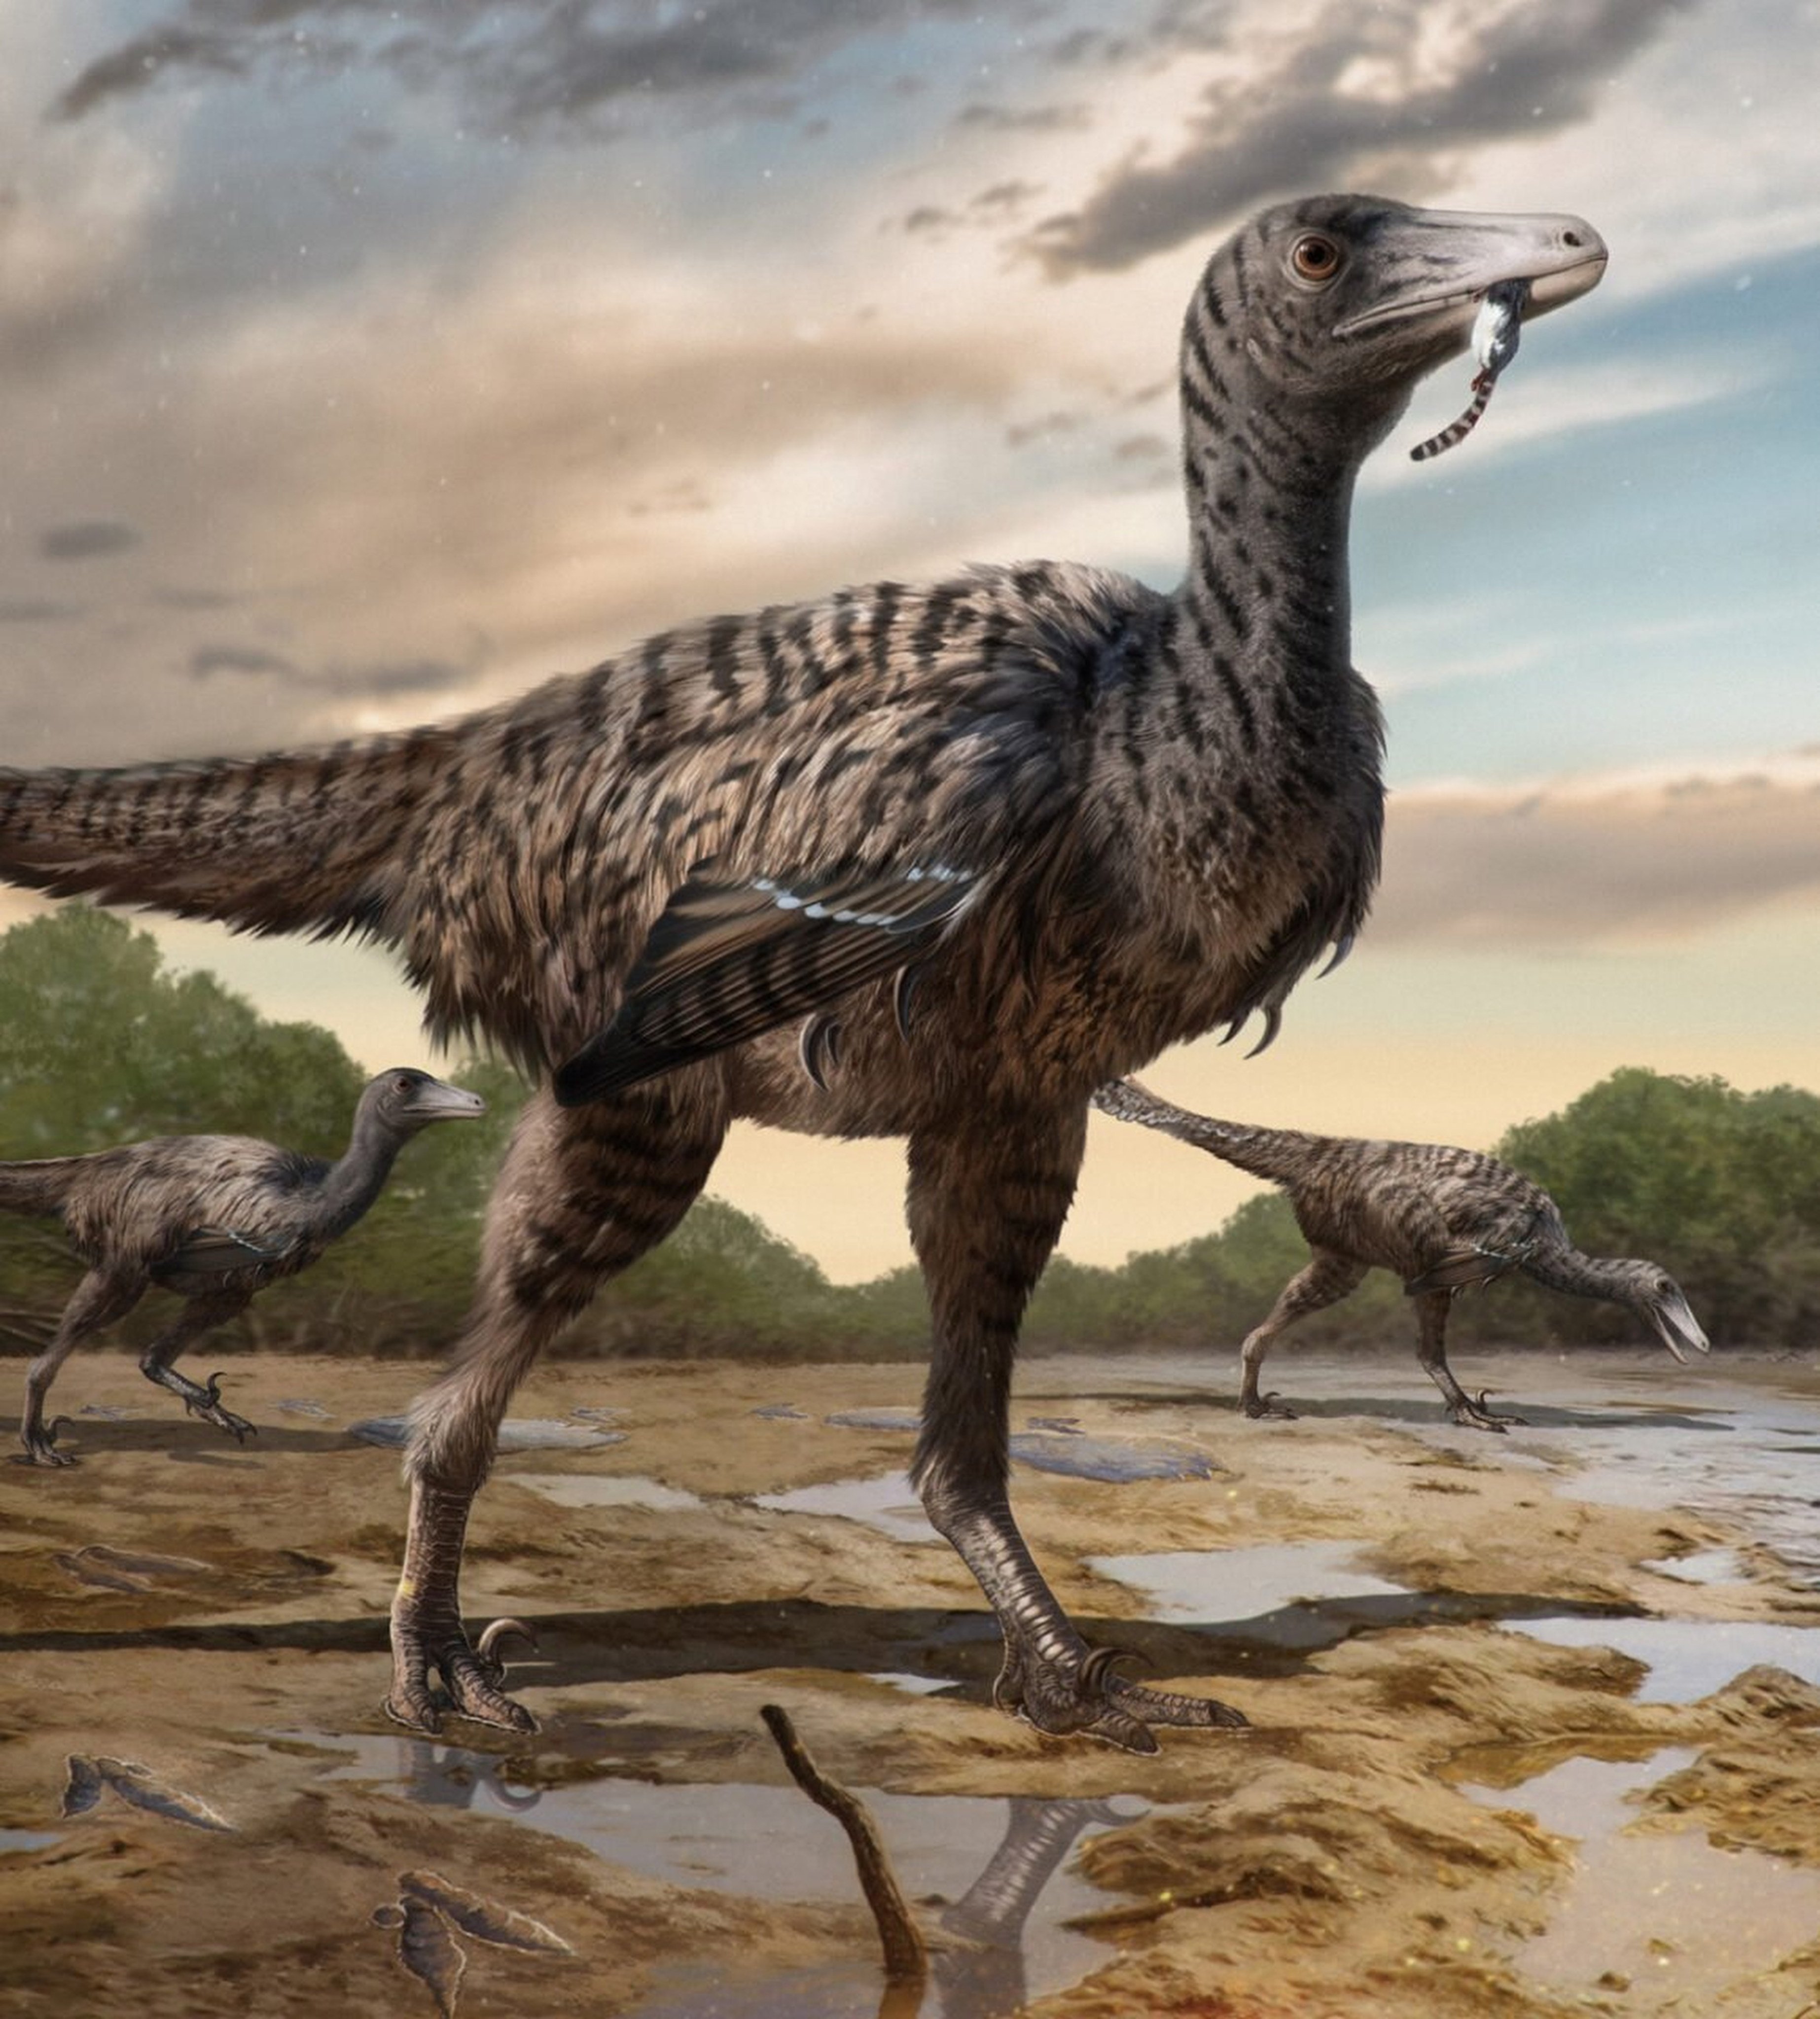 Giant raptors such as the Fujianipus yingliangi might have surpassed similar dinosaurs in size as they shifted to eating larger prey and began “invading niches further up the food chain”, according to researchers. Photo: iScience